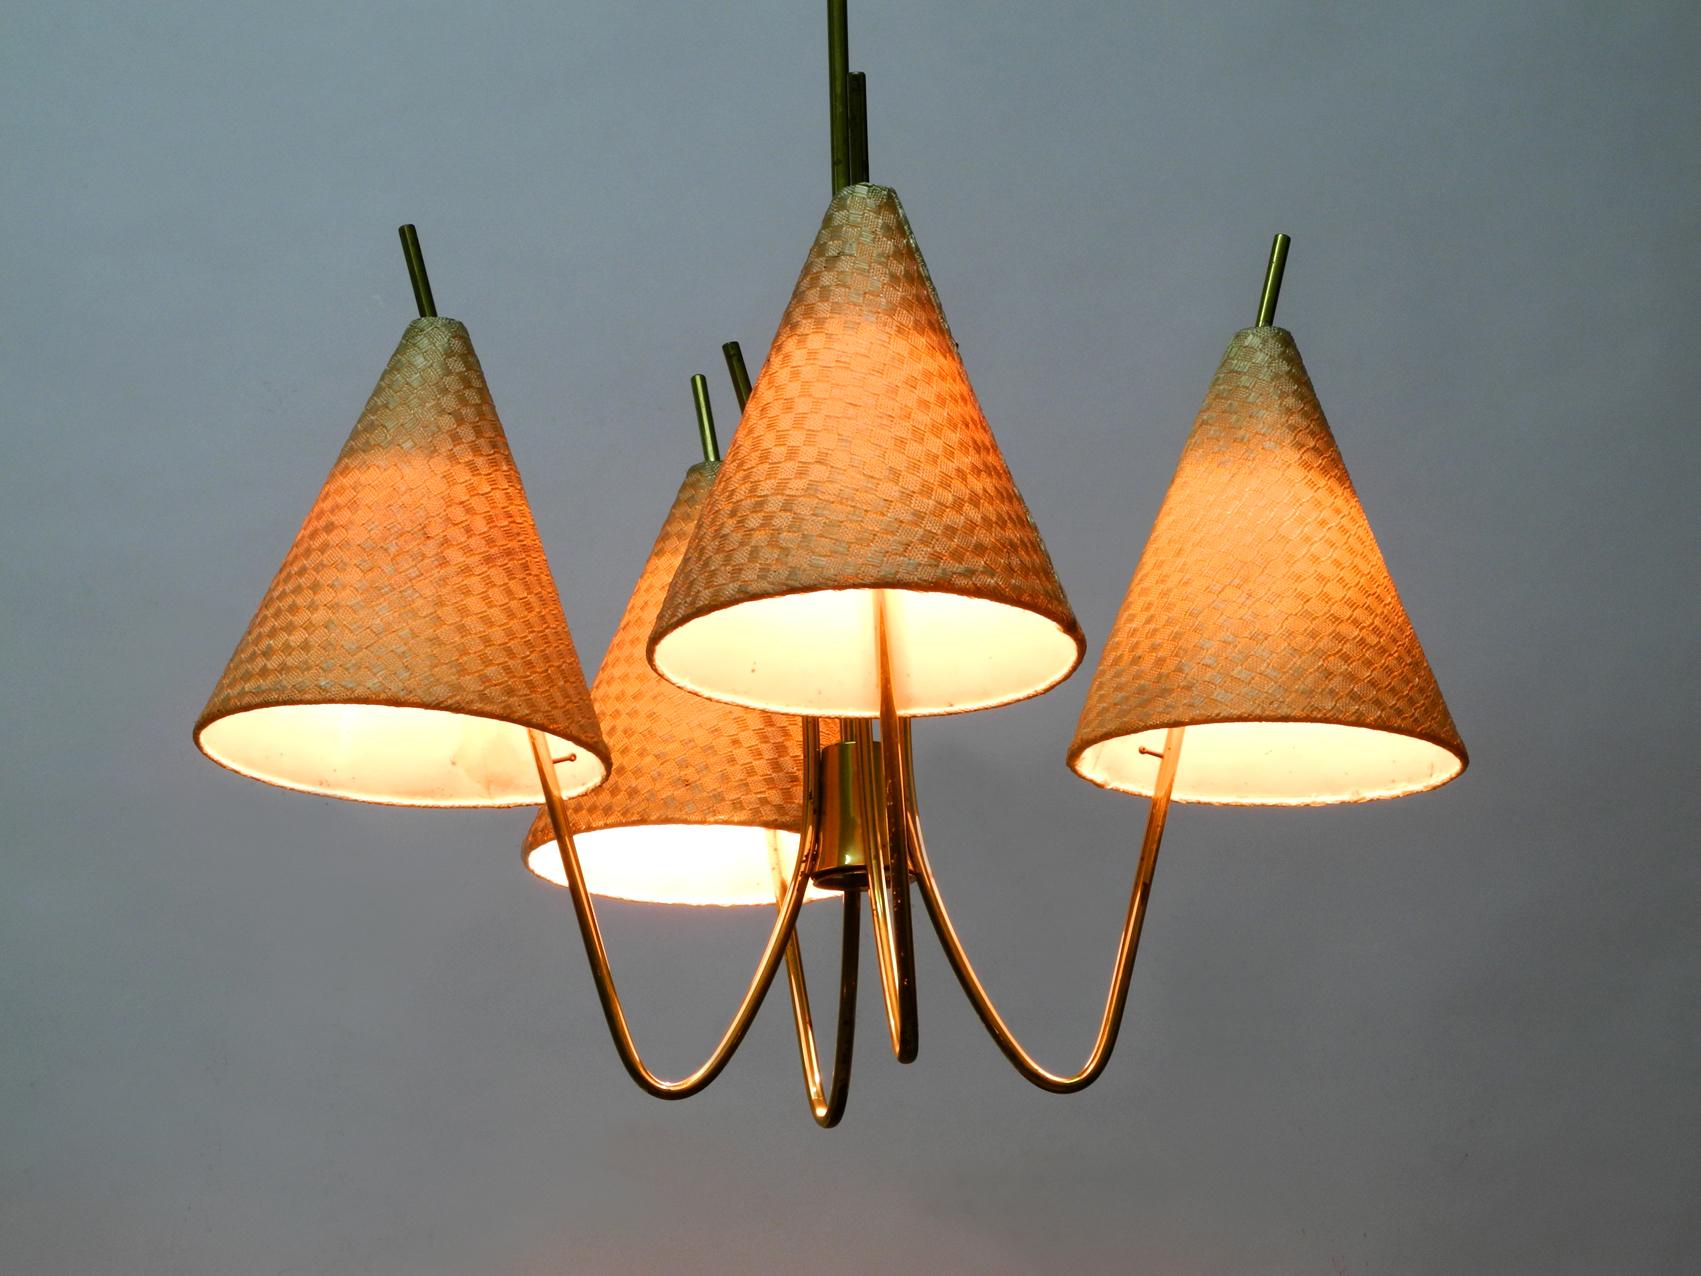 Very rare elegant 1960s ceiling lamp by J. T. Kalmar, Made in Austria. Frame entirely made of brass, the shades are made of raffia. Very stunning and elegant design. The lamp is in a very good original vintage condition. No damages to the entire